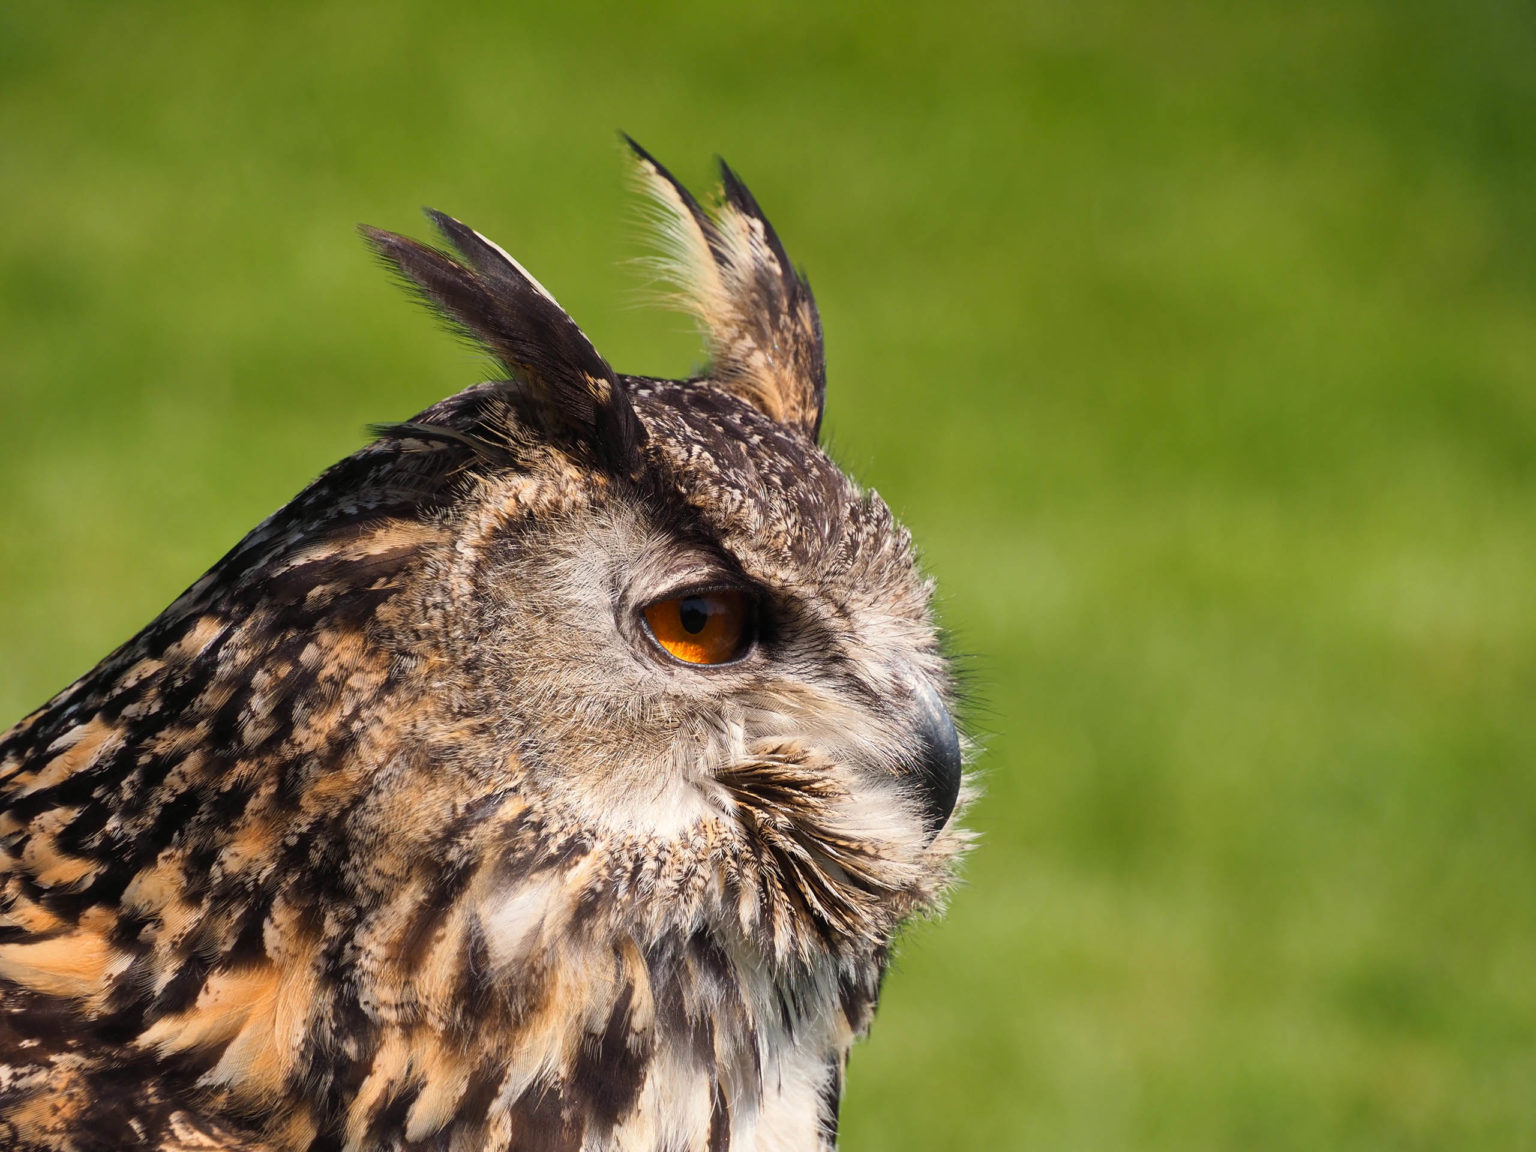 An owl at the Swinton Estate in North Yorkshire